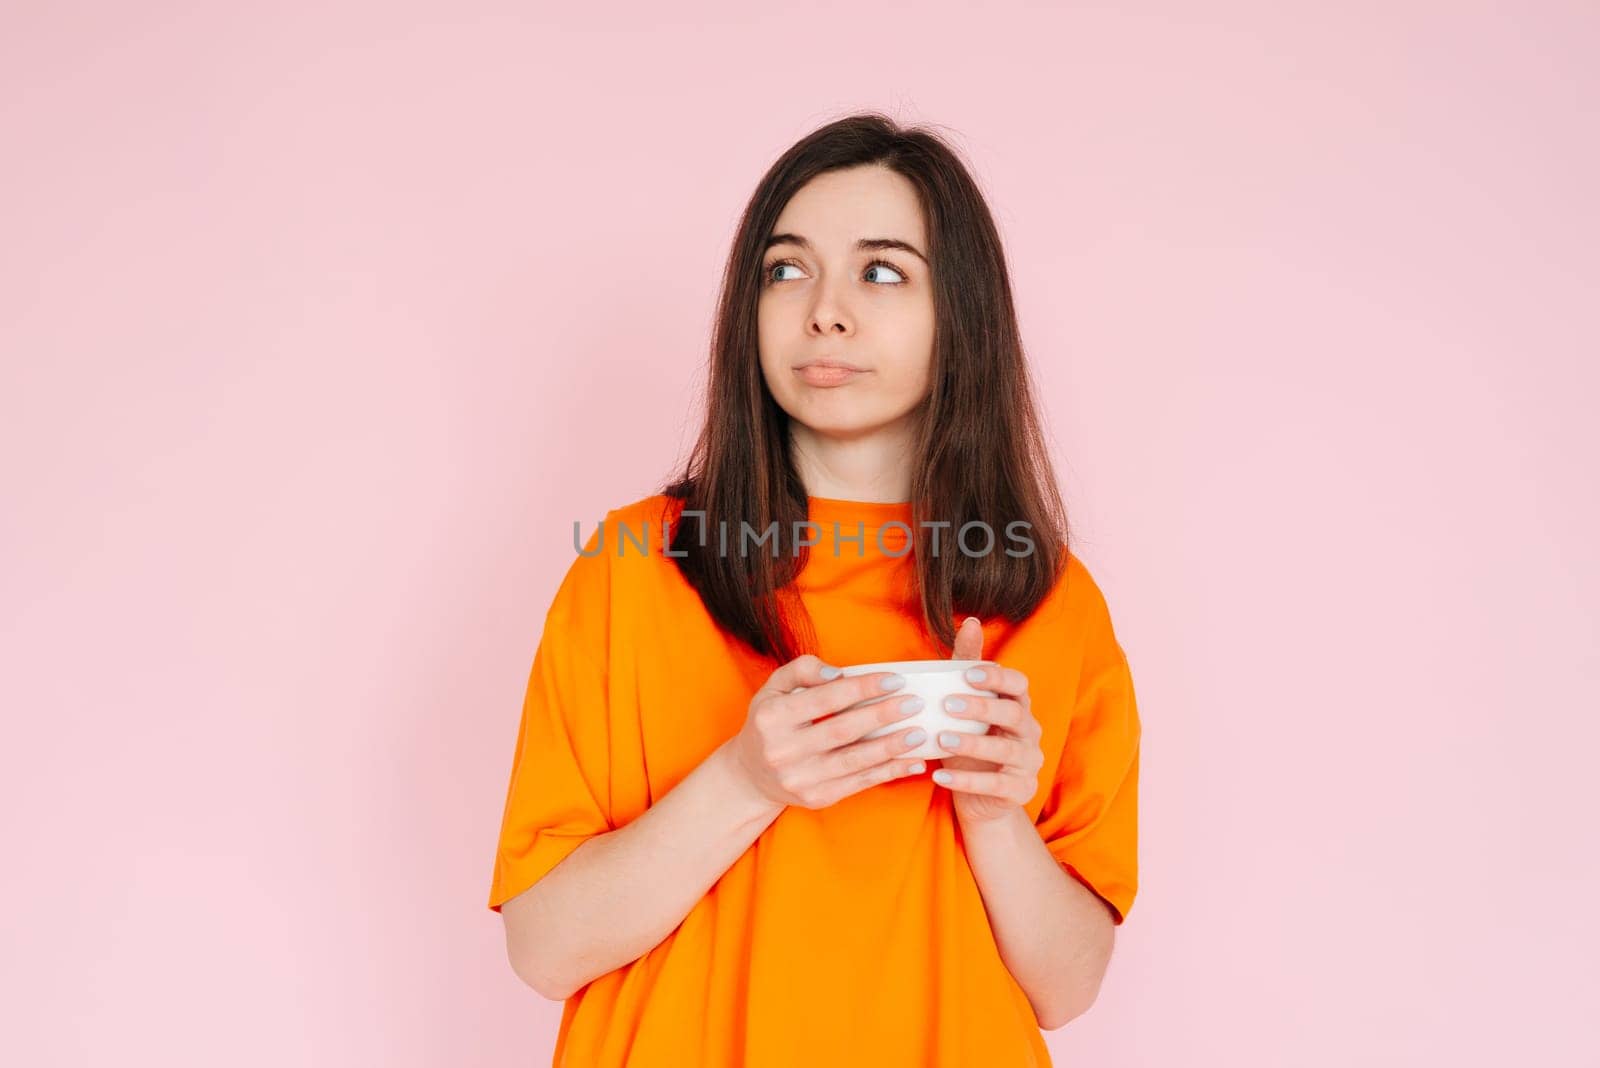 Sophisticated Taste: Elegant Woman Contemplating Drink Selection, Gazing at Empty Space - Decadence and Delightful Choices, Isolated on Pink Background